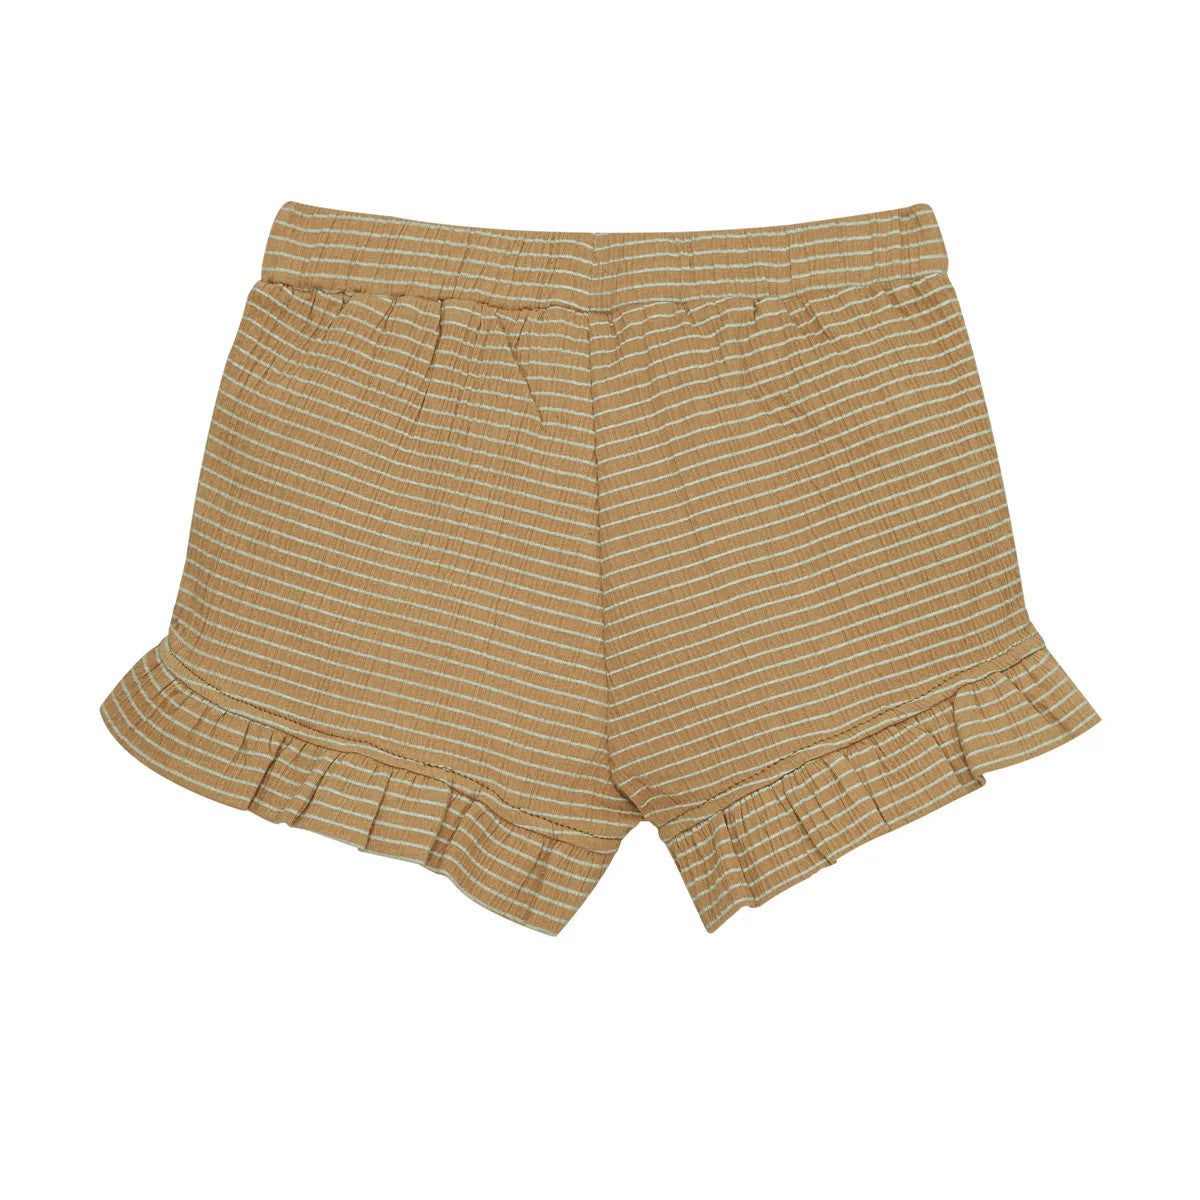 Little Hedonist ruffled short in Amber Gold almond for girls. Made from organic soft muslin. Sustainable kids clothing.